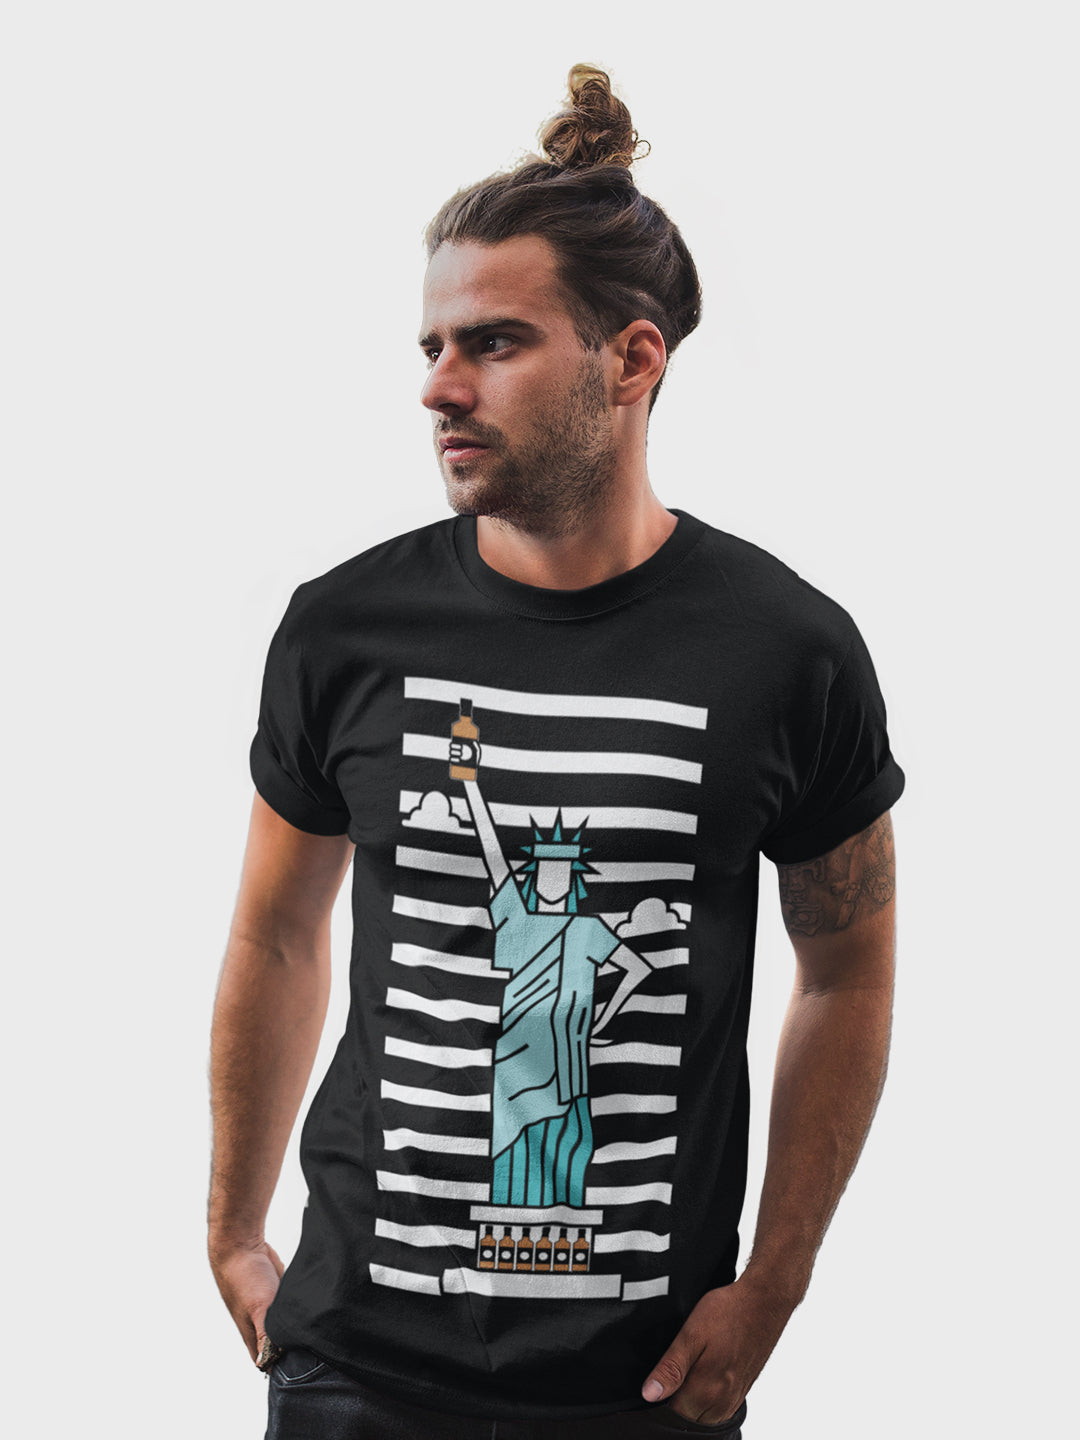 The Party Of Liberty T-Shirt